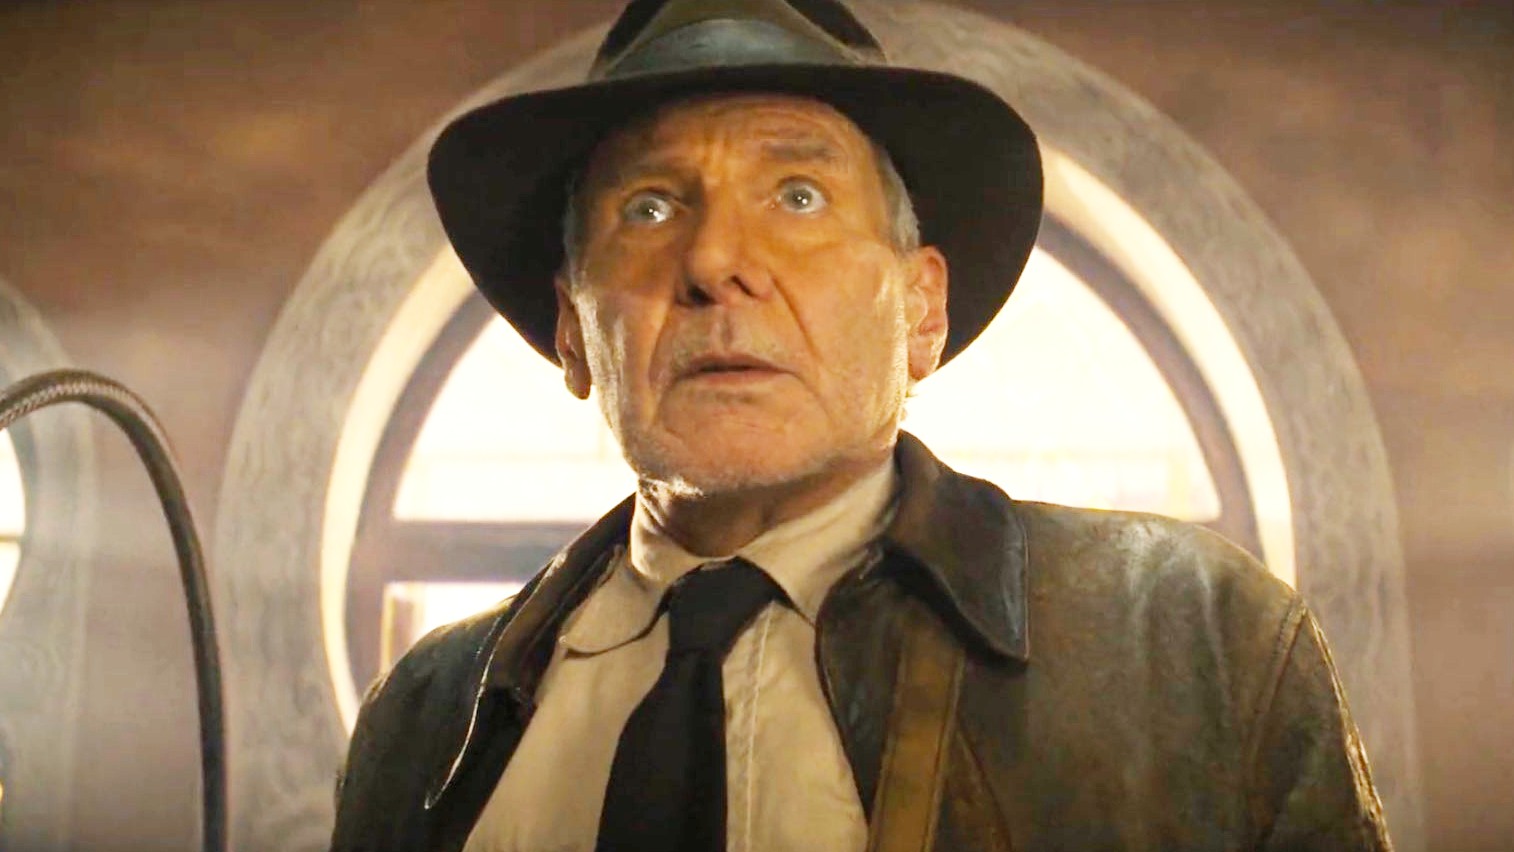 Indiana Jones and the Dial of Destiny review: A 5th and possibly final  adventure : NPR